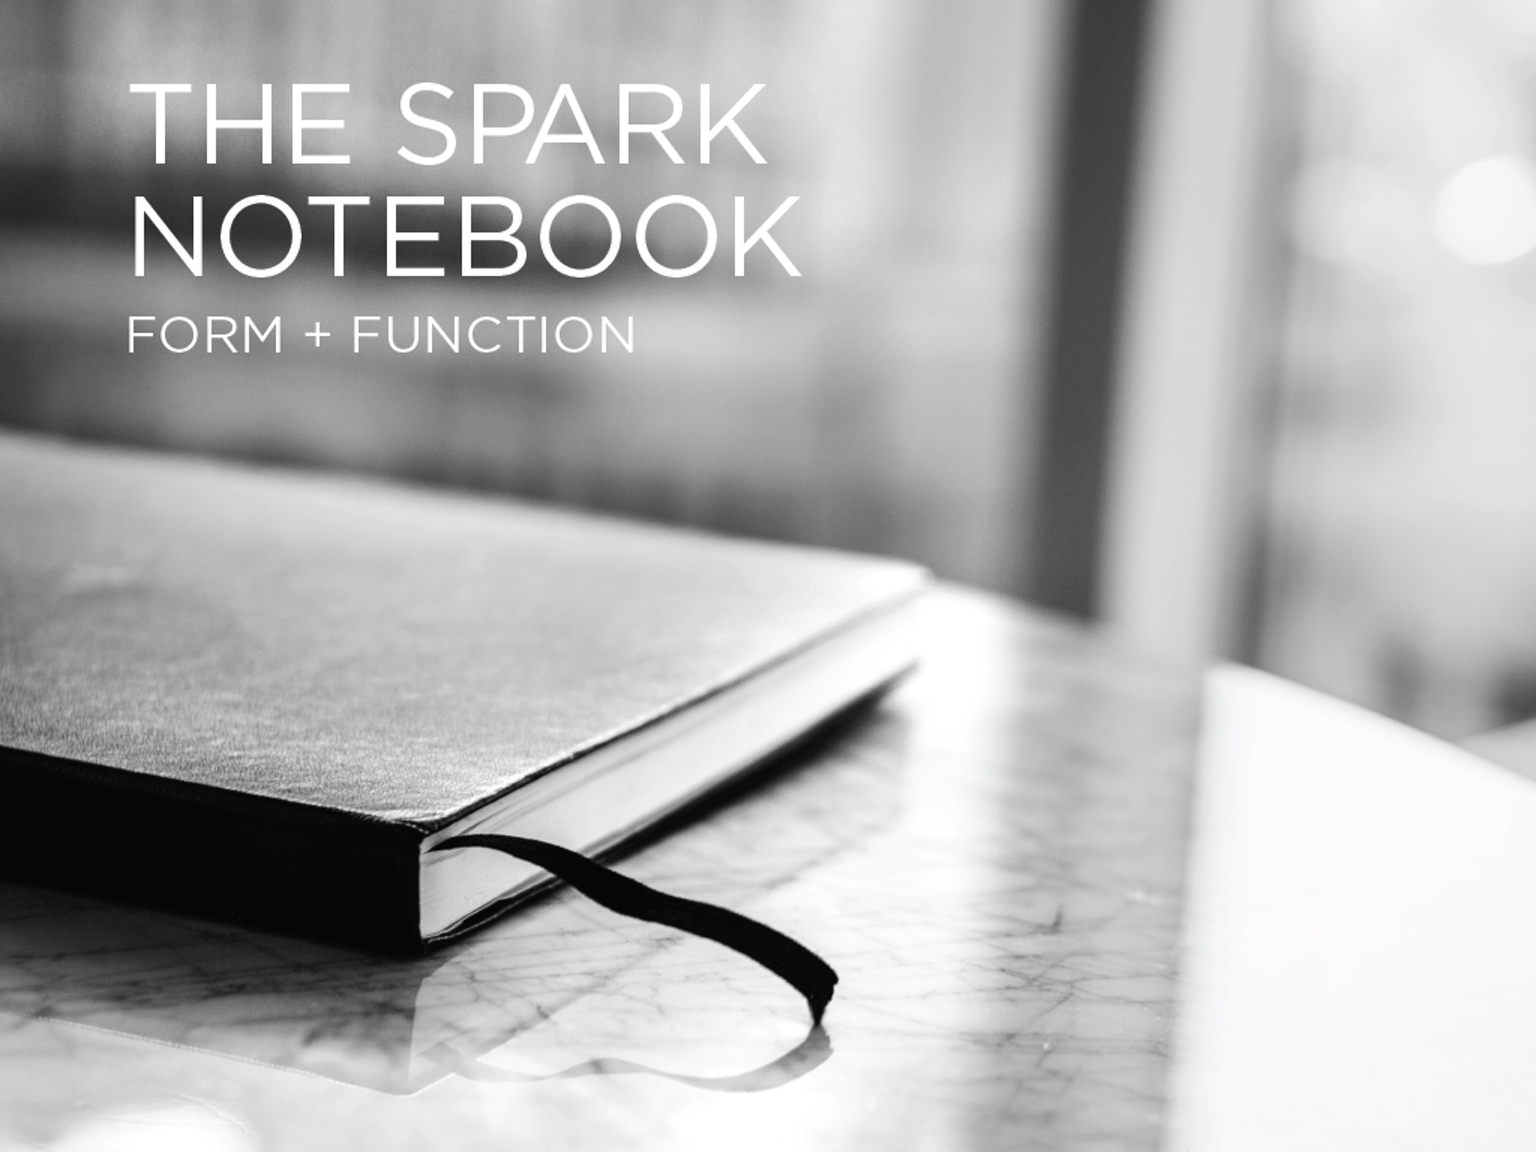 The Spark Notebook